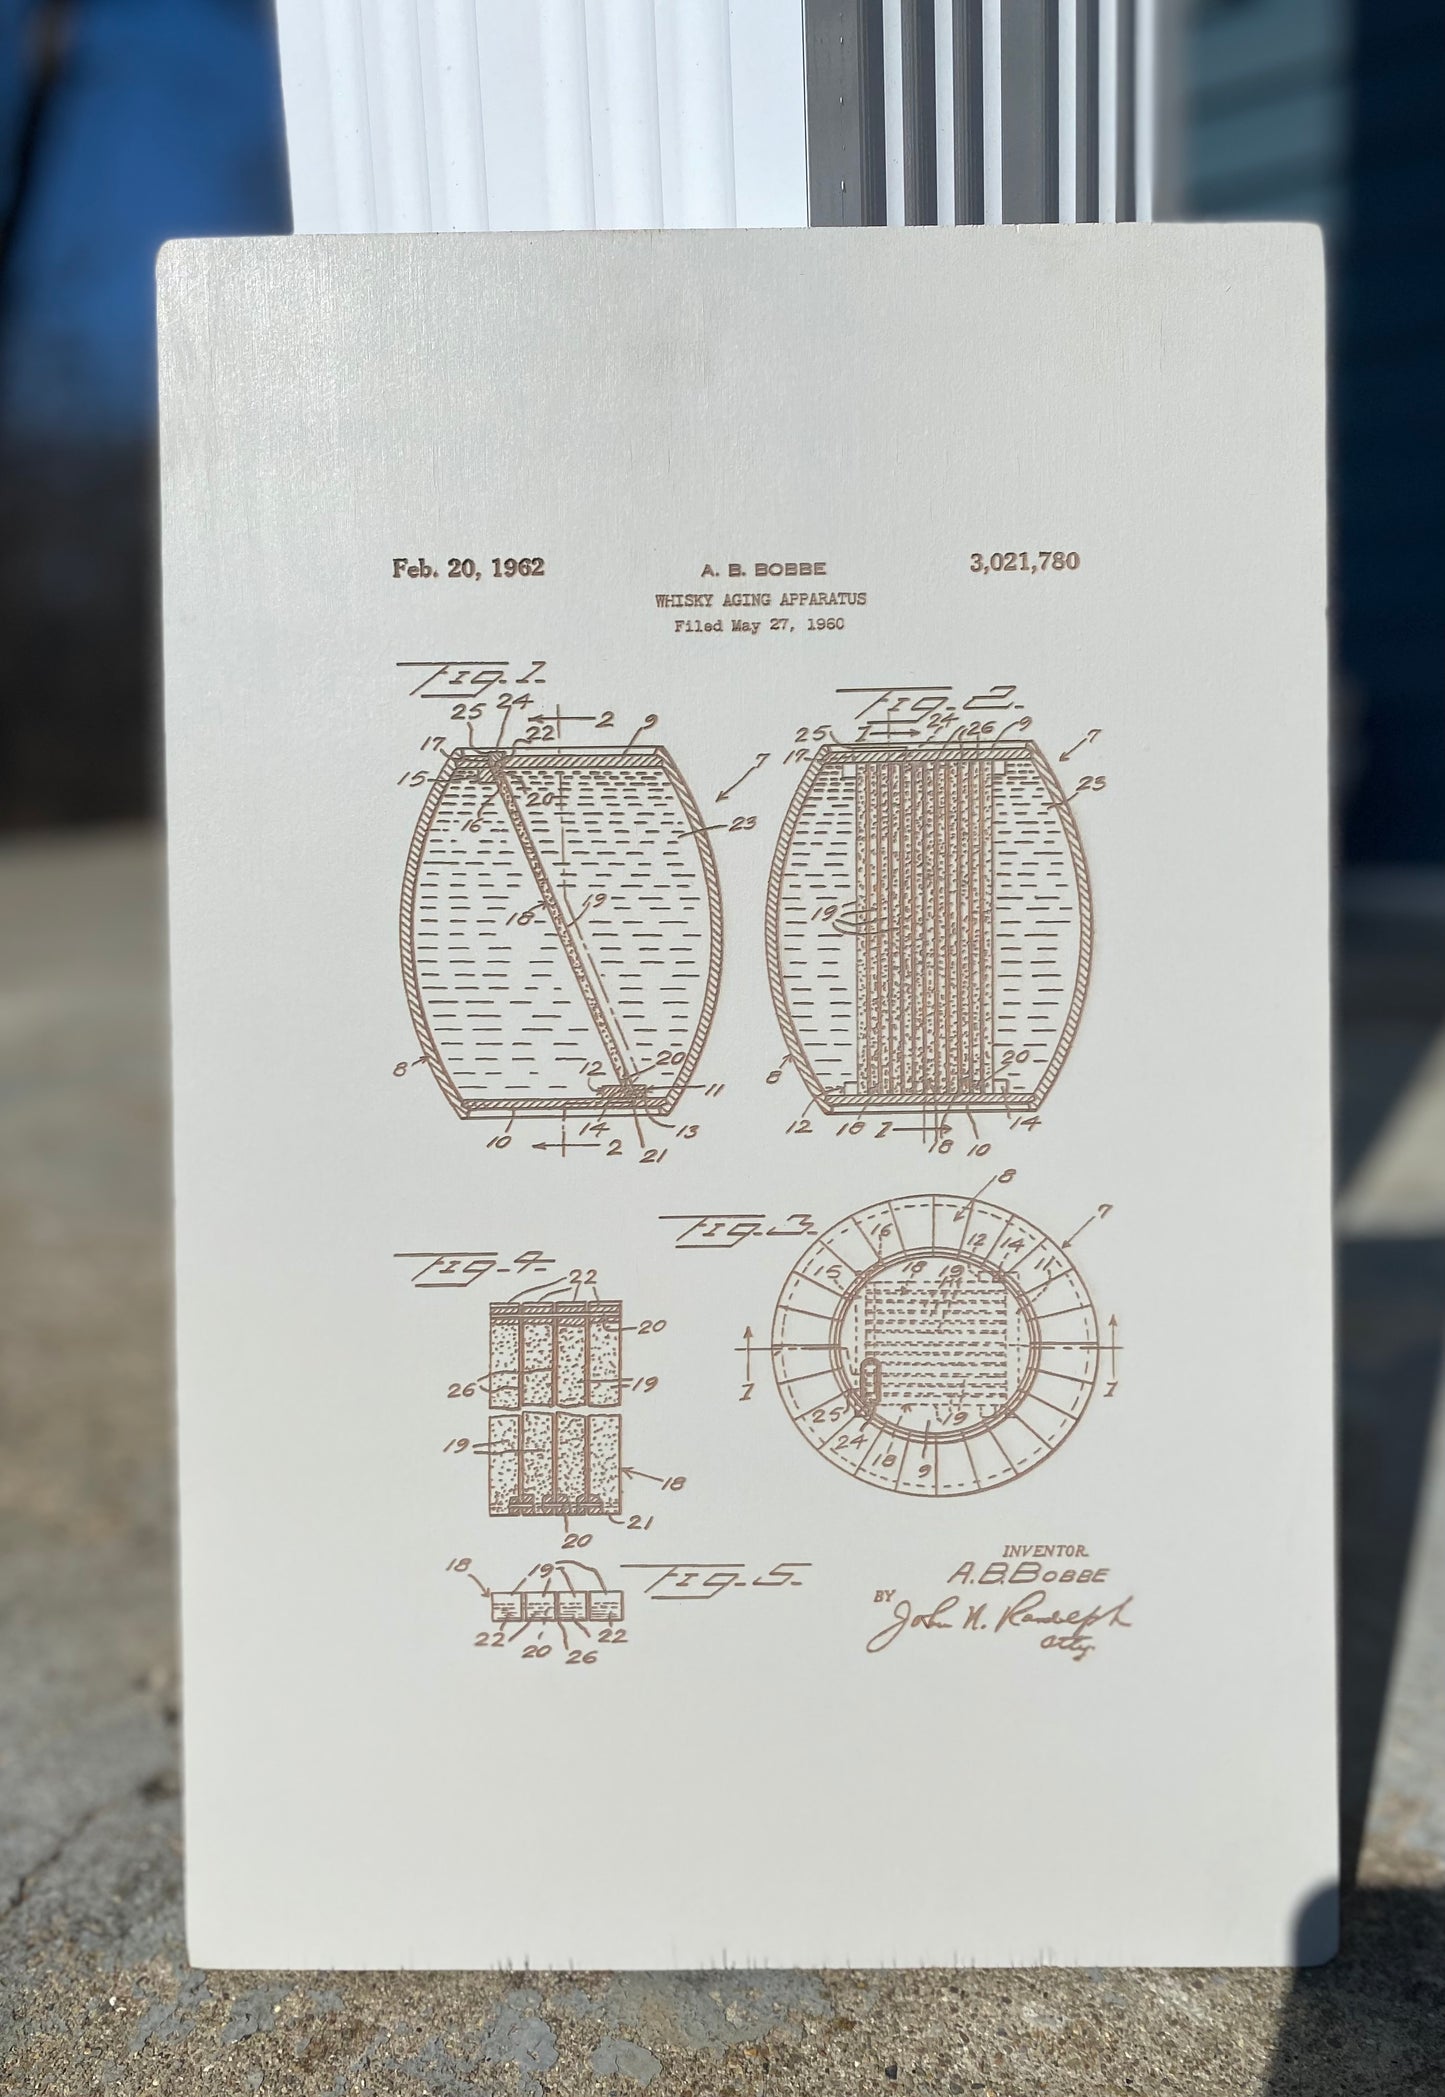 10x15 "Whiskey Aging Apparatus" Patent - Laser Engraved